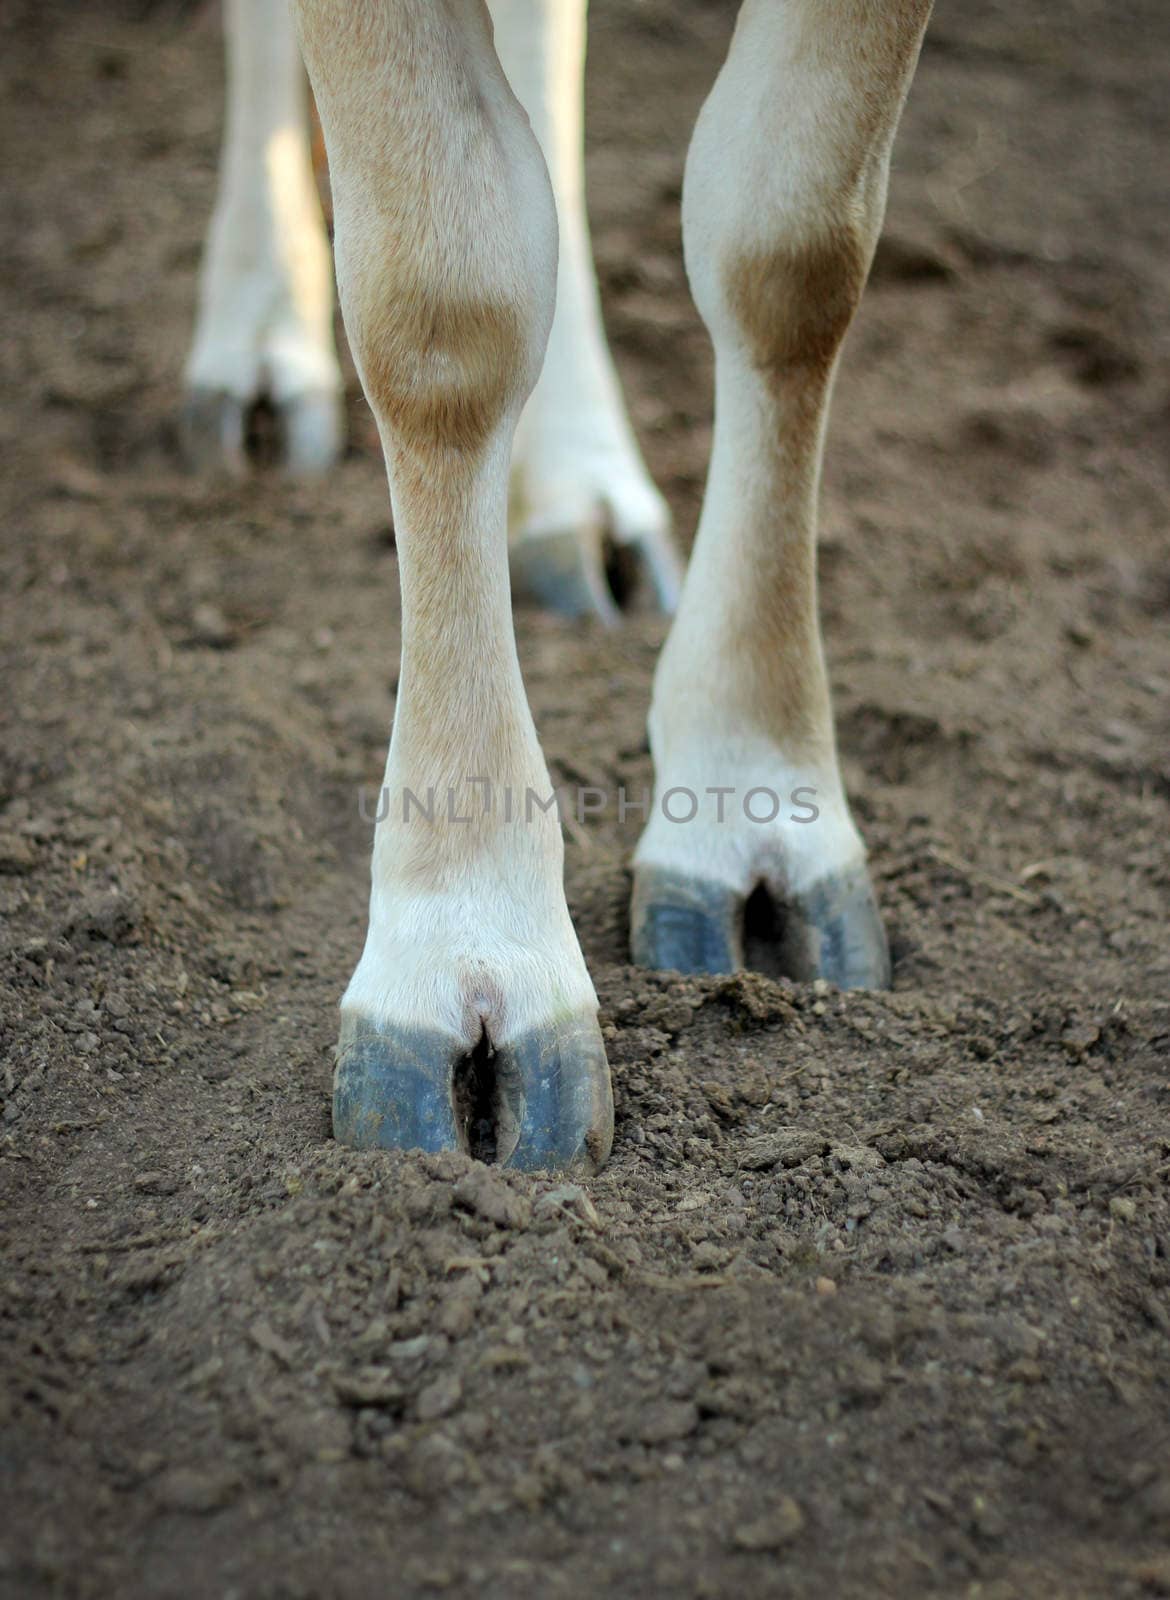 The legs of a cow standing on the ground. by yod67